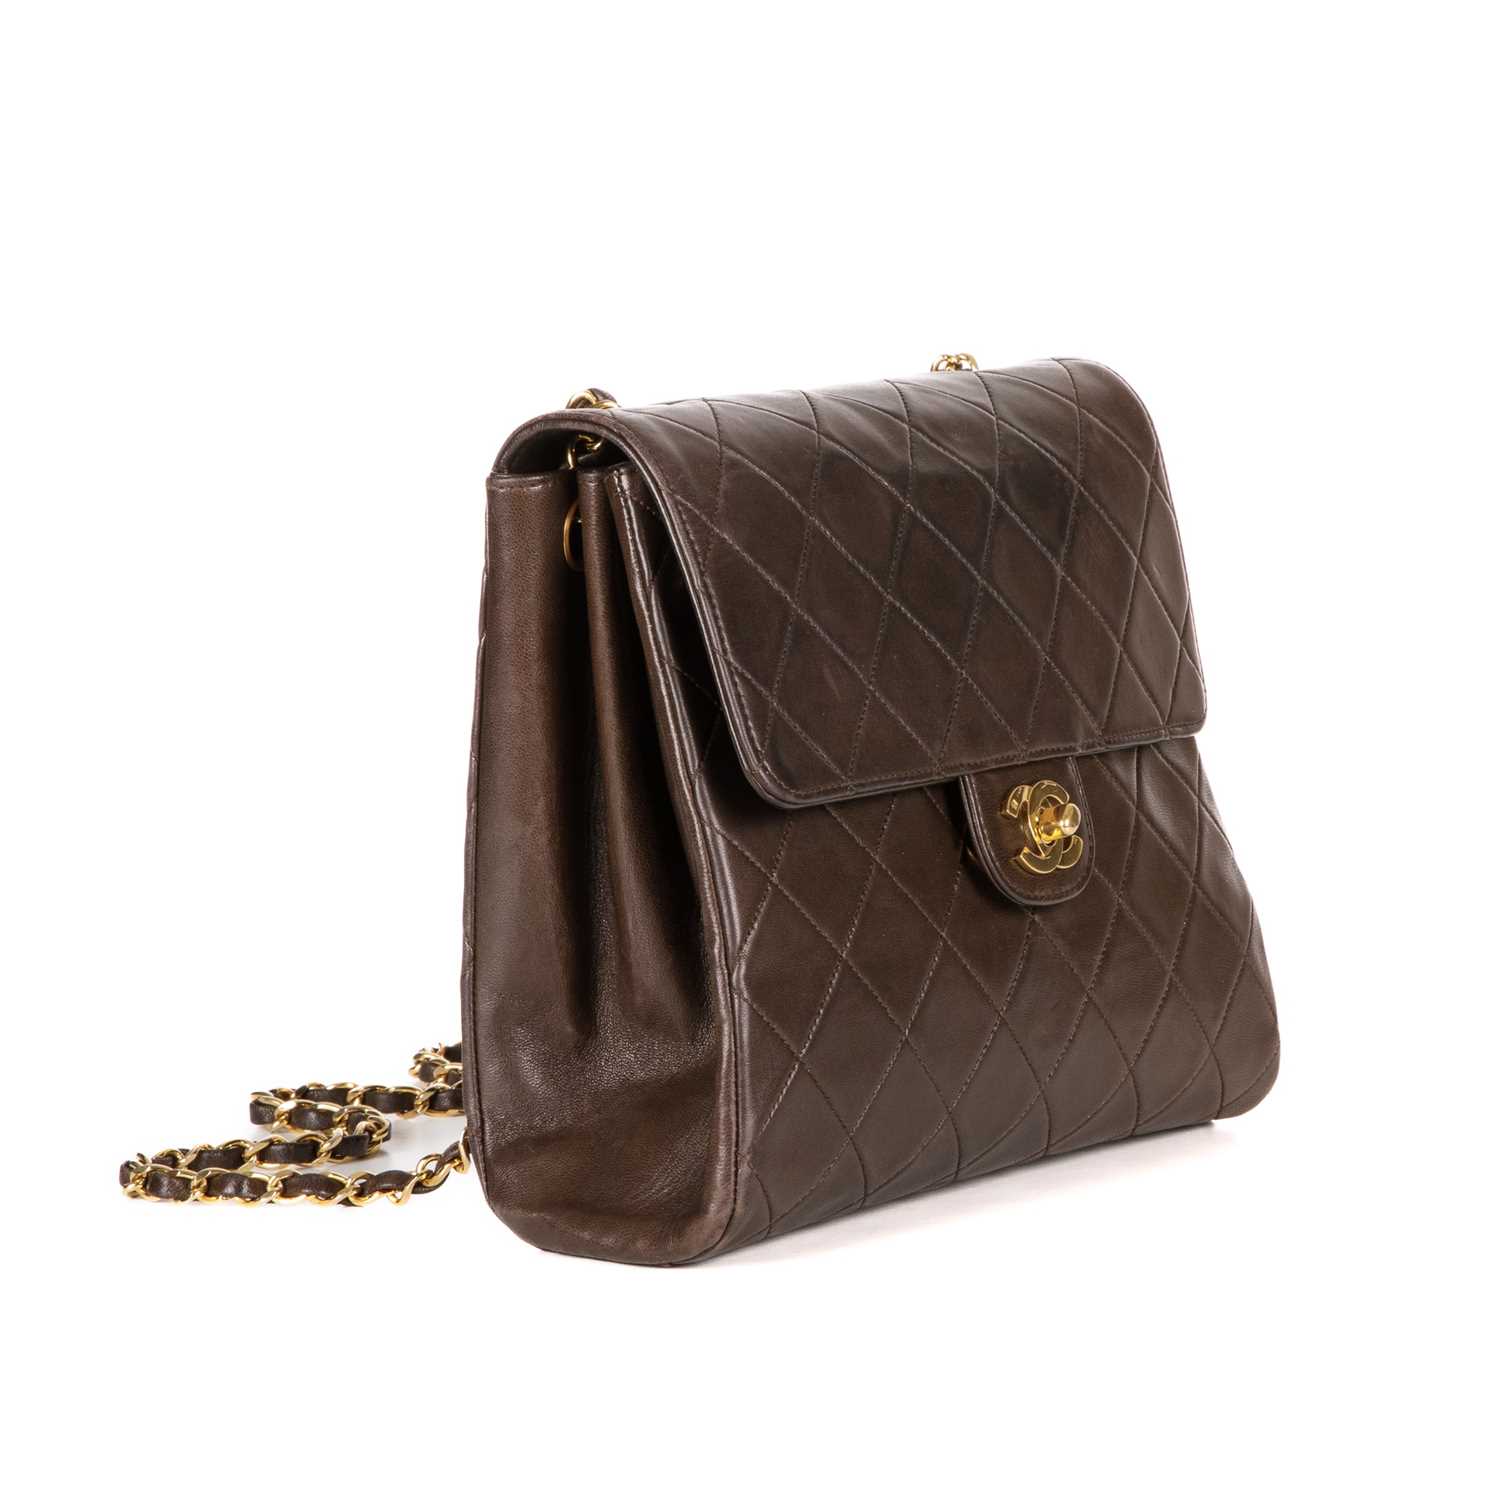 Chanel, a vintage Single Flap handbag, designed with a diamond quilted brown lambskin leather - Image 3 of 4